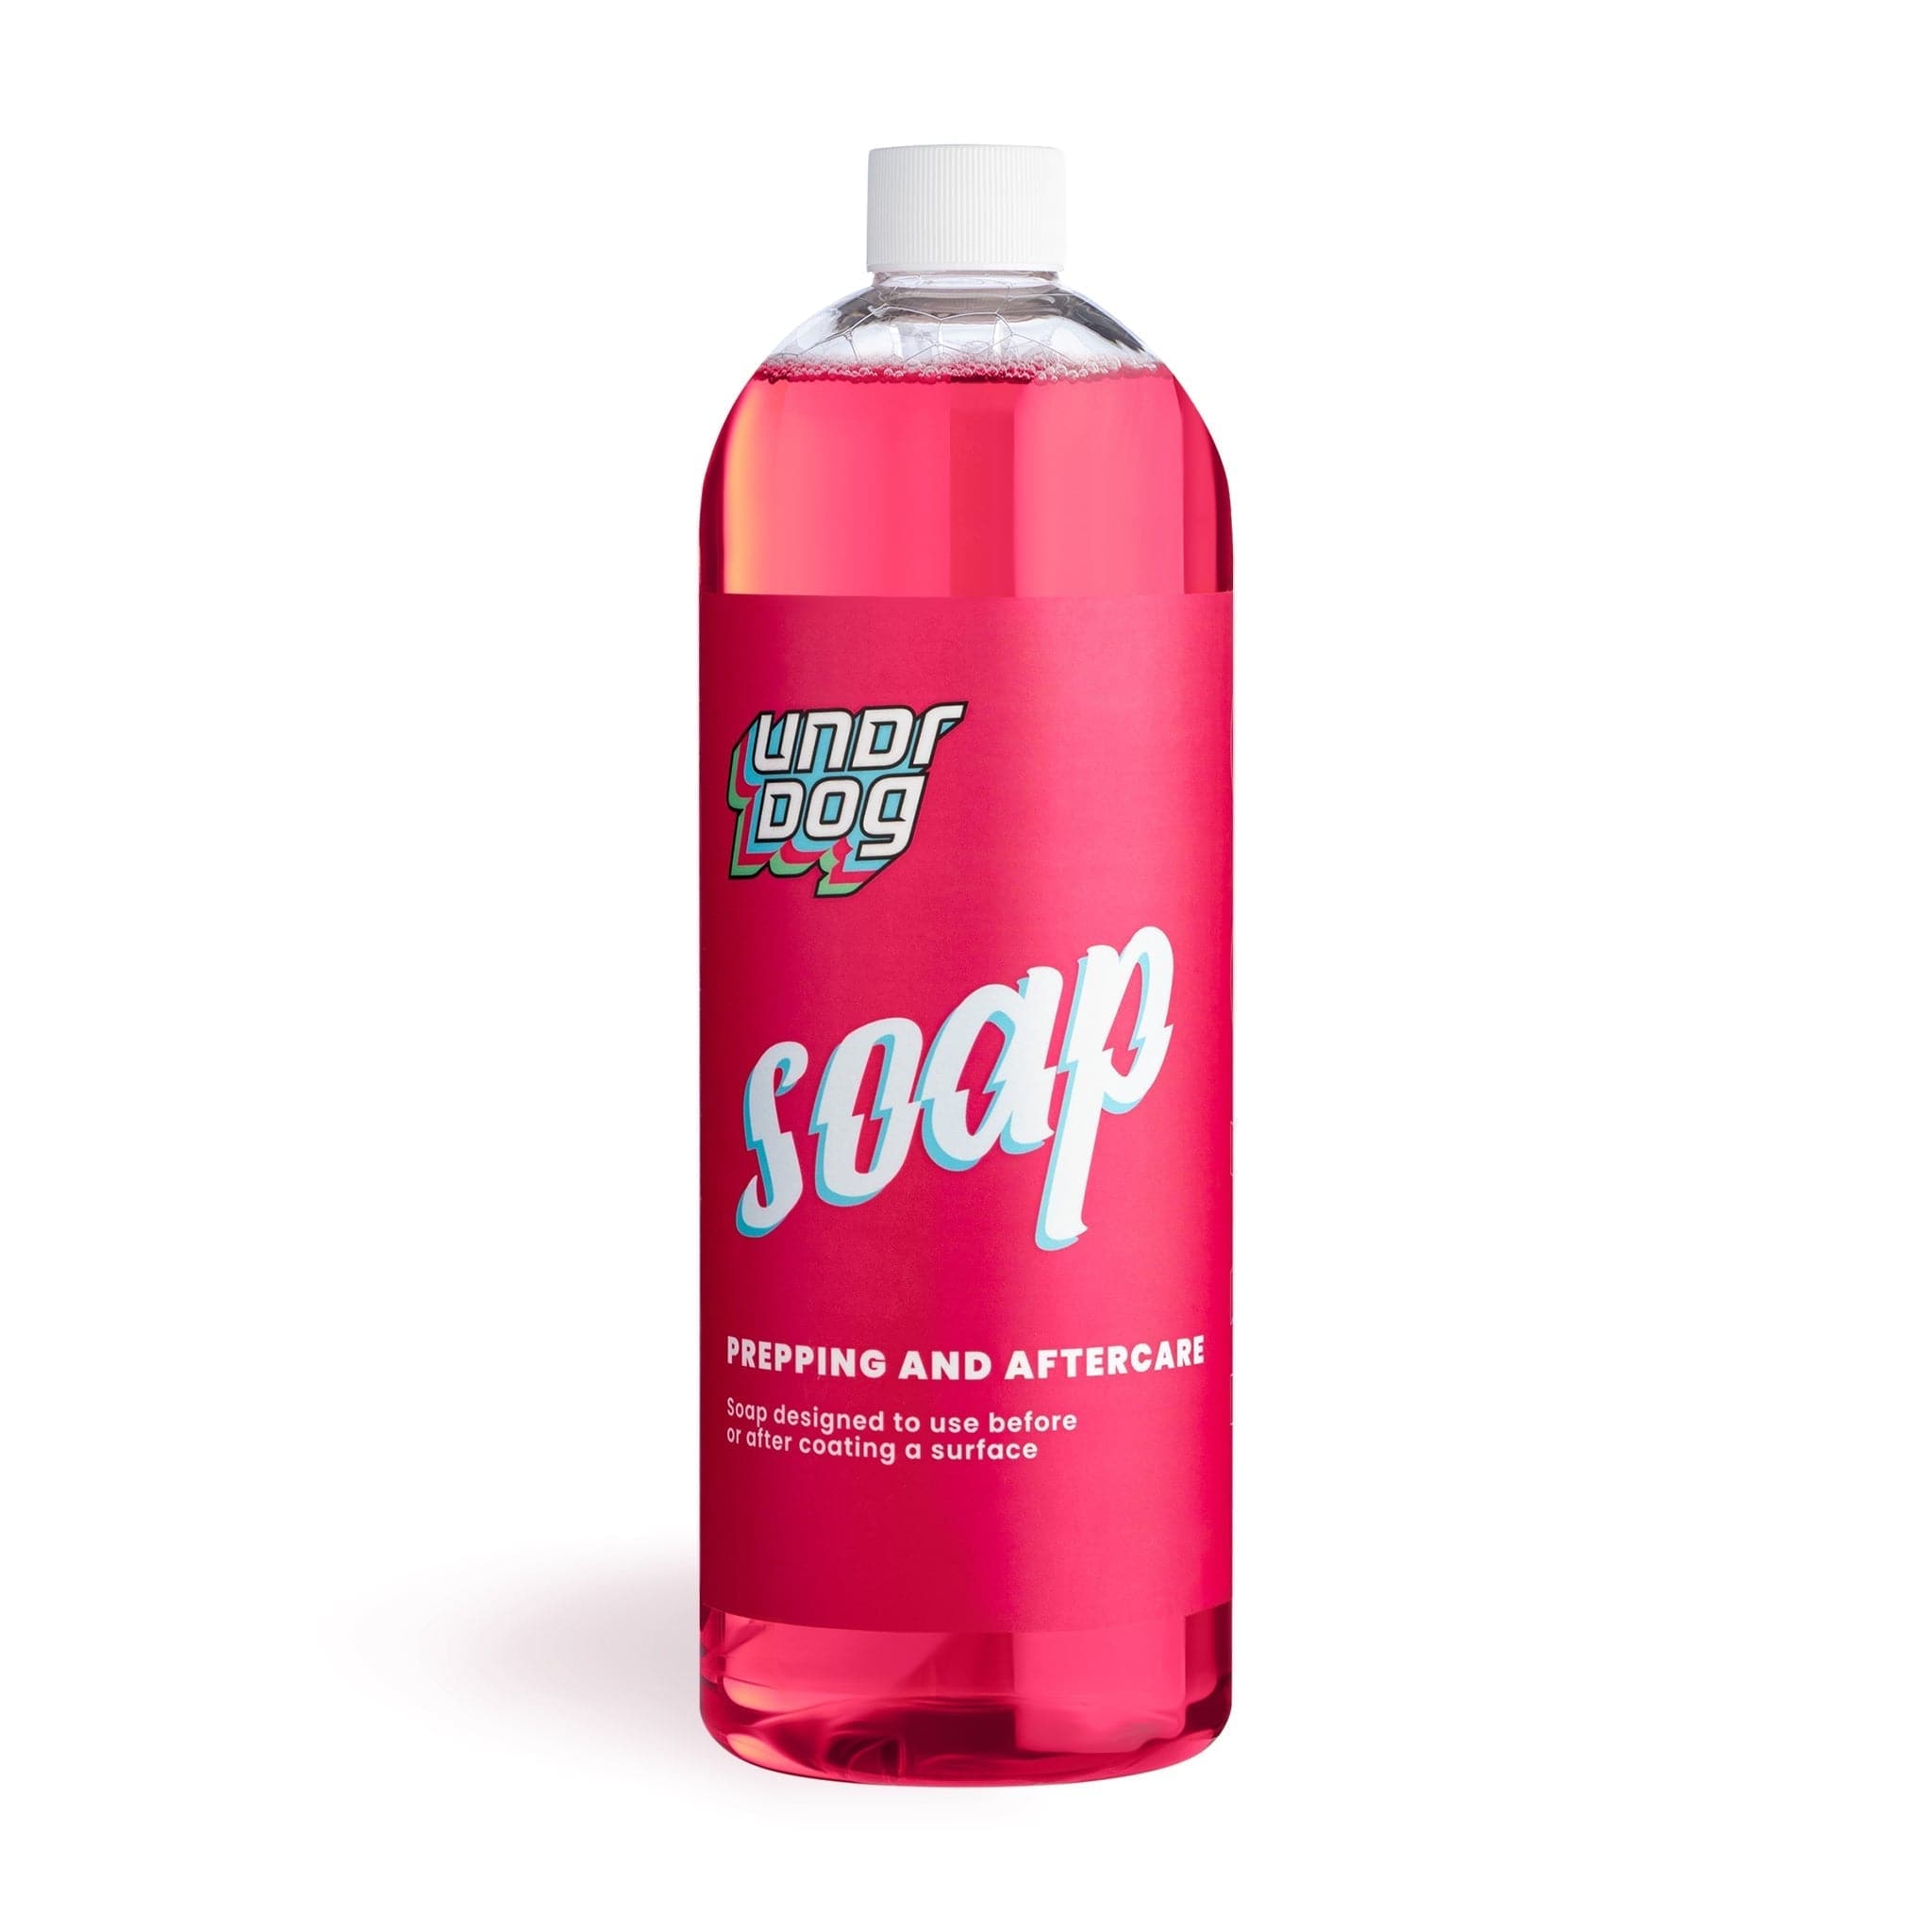 Soap32oz_f9107abd-ec9c-431e-ac98-ffcf386408f1.jpg - ColorPop Car Soap: Vibrant Cleaning for Every Hue! - Undrdog Surface Products